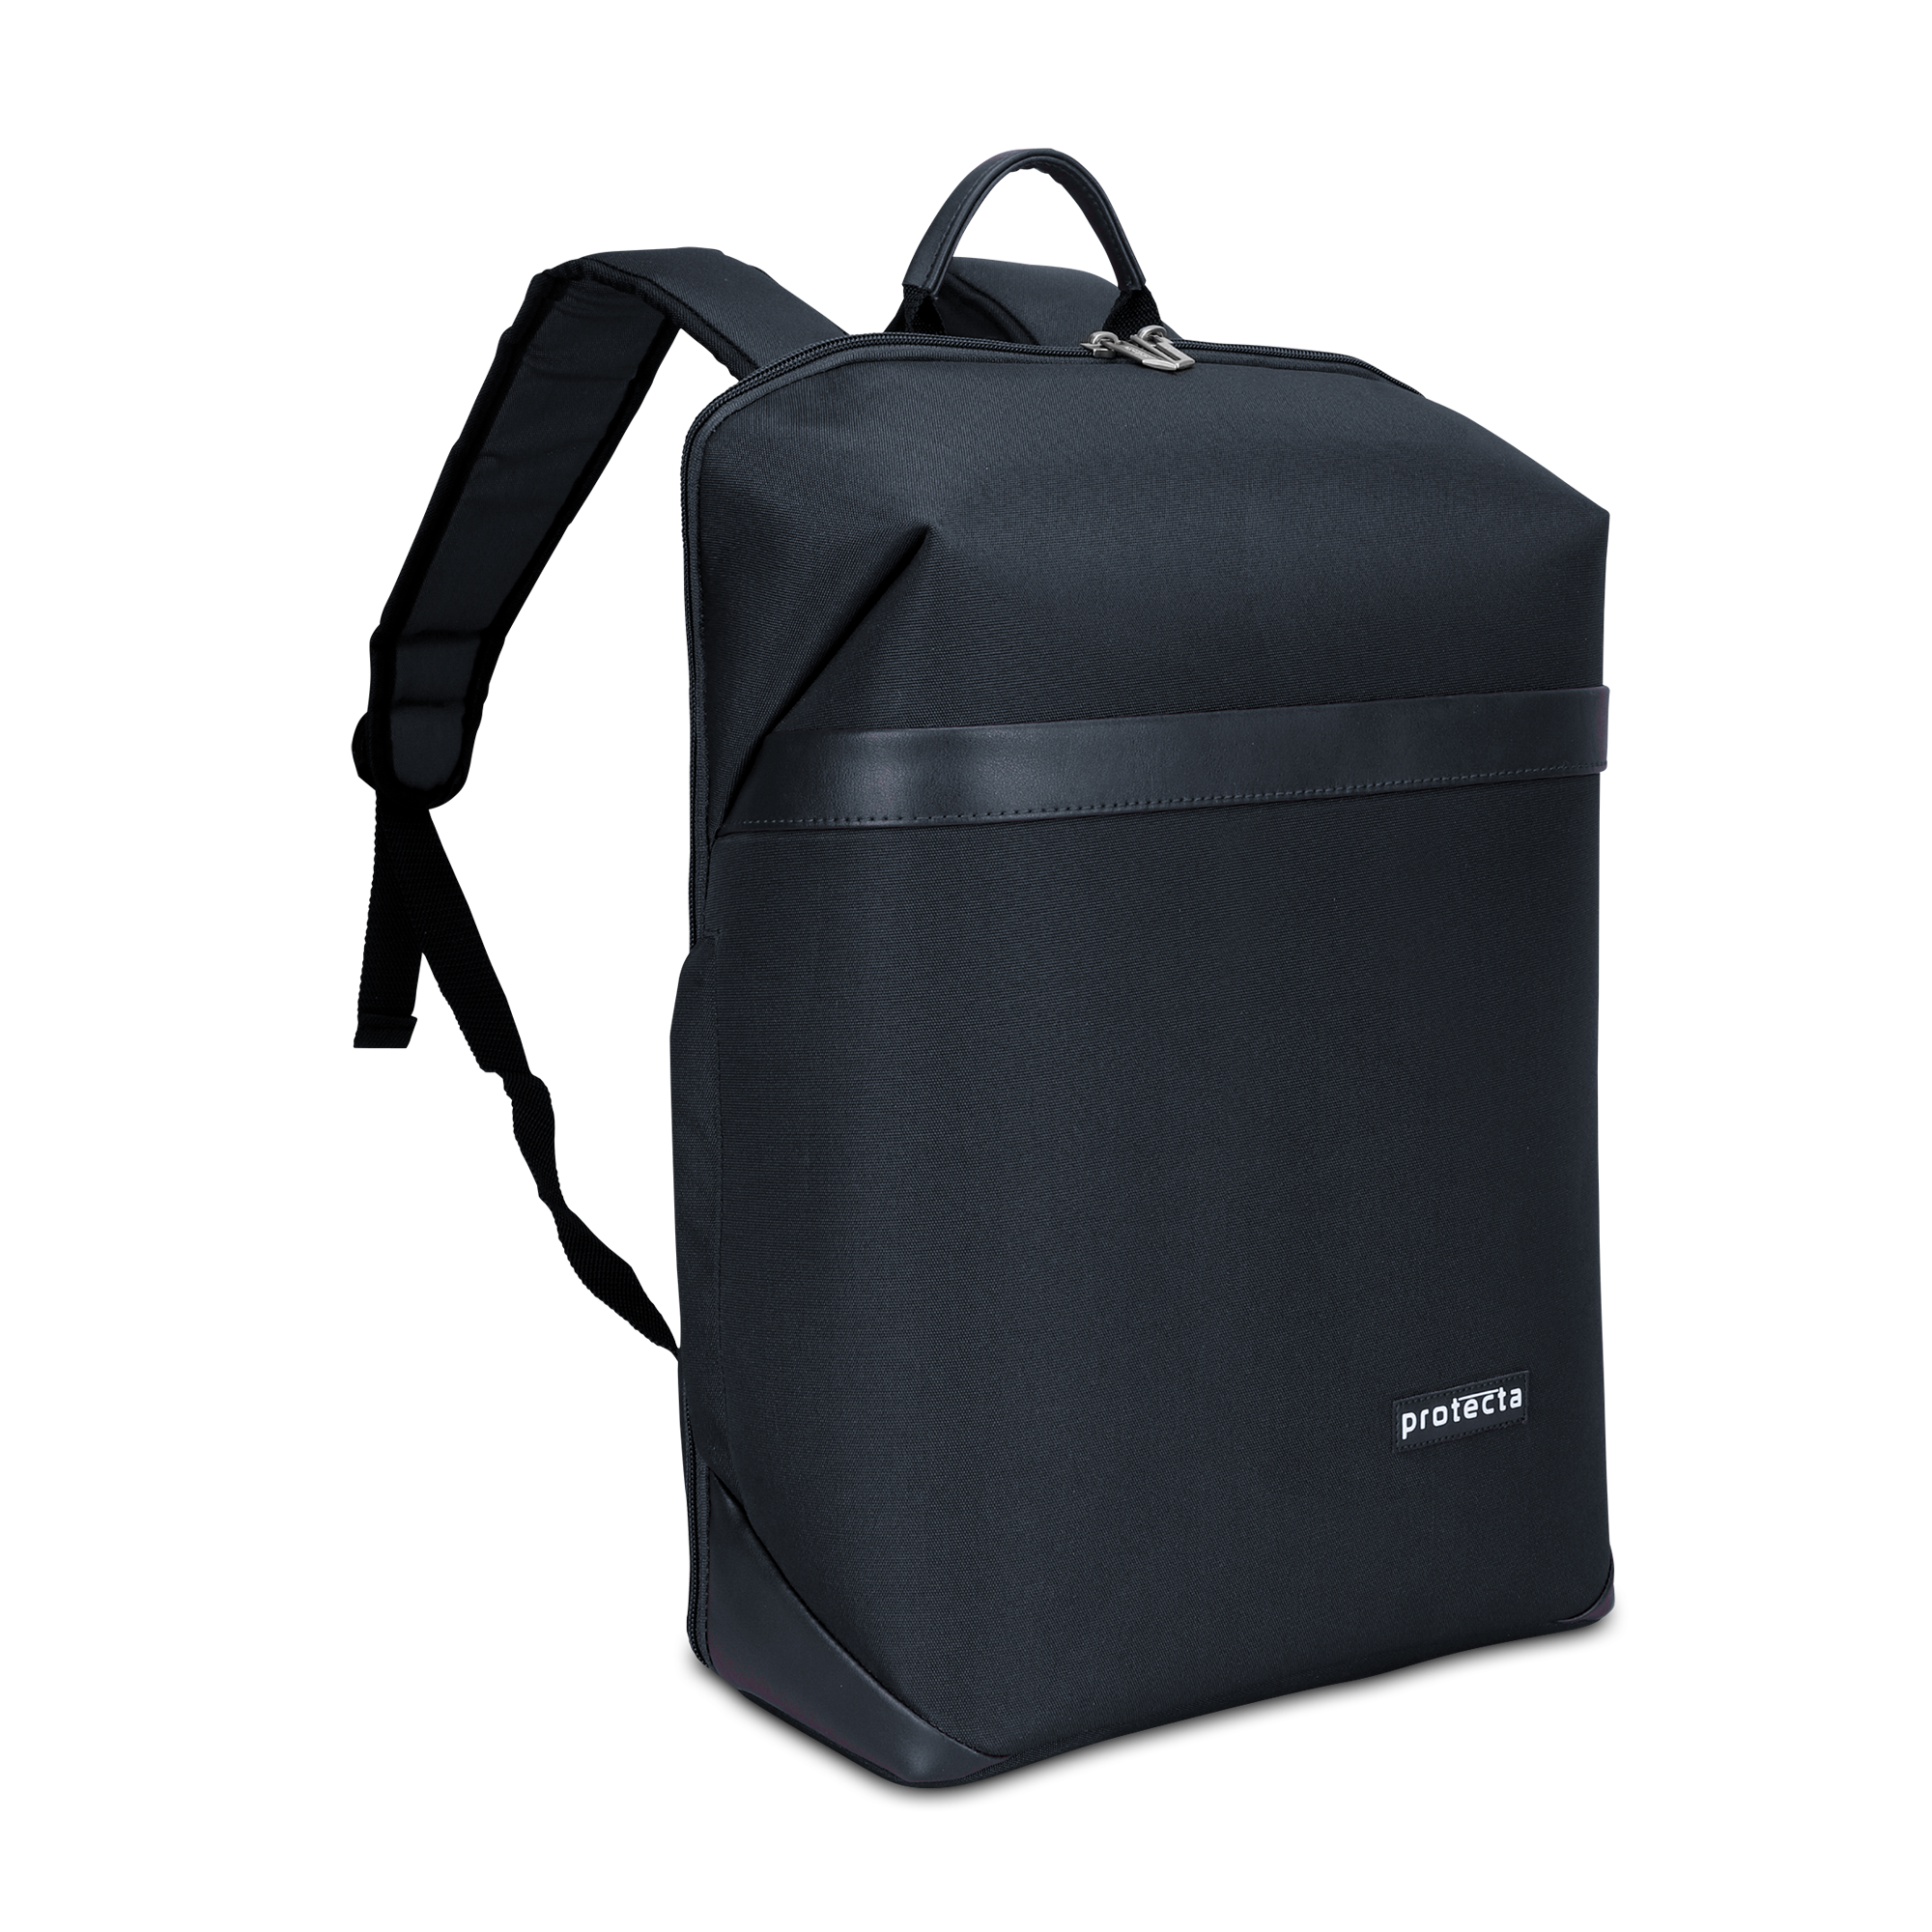 Black | Protecta Early Lead Anti-Theft Office Laptop Backpack - 2